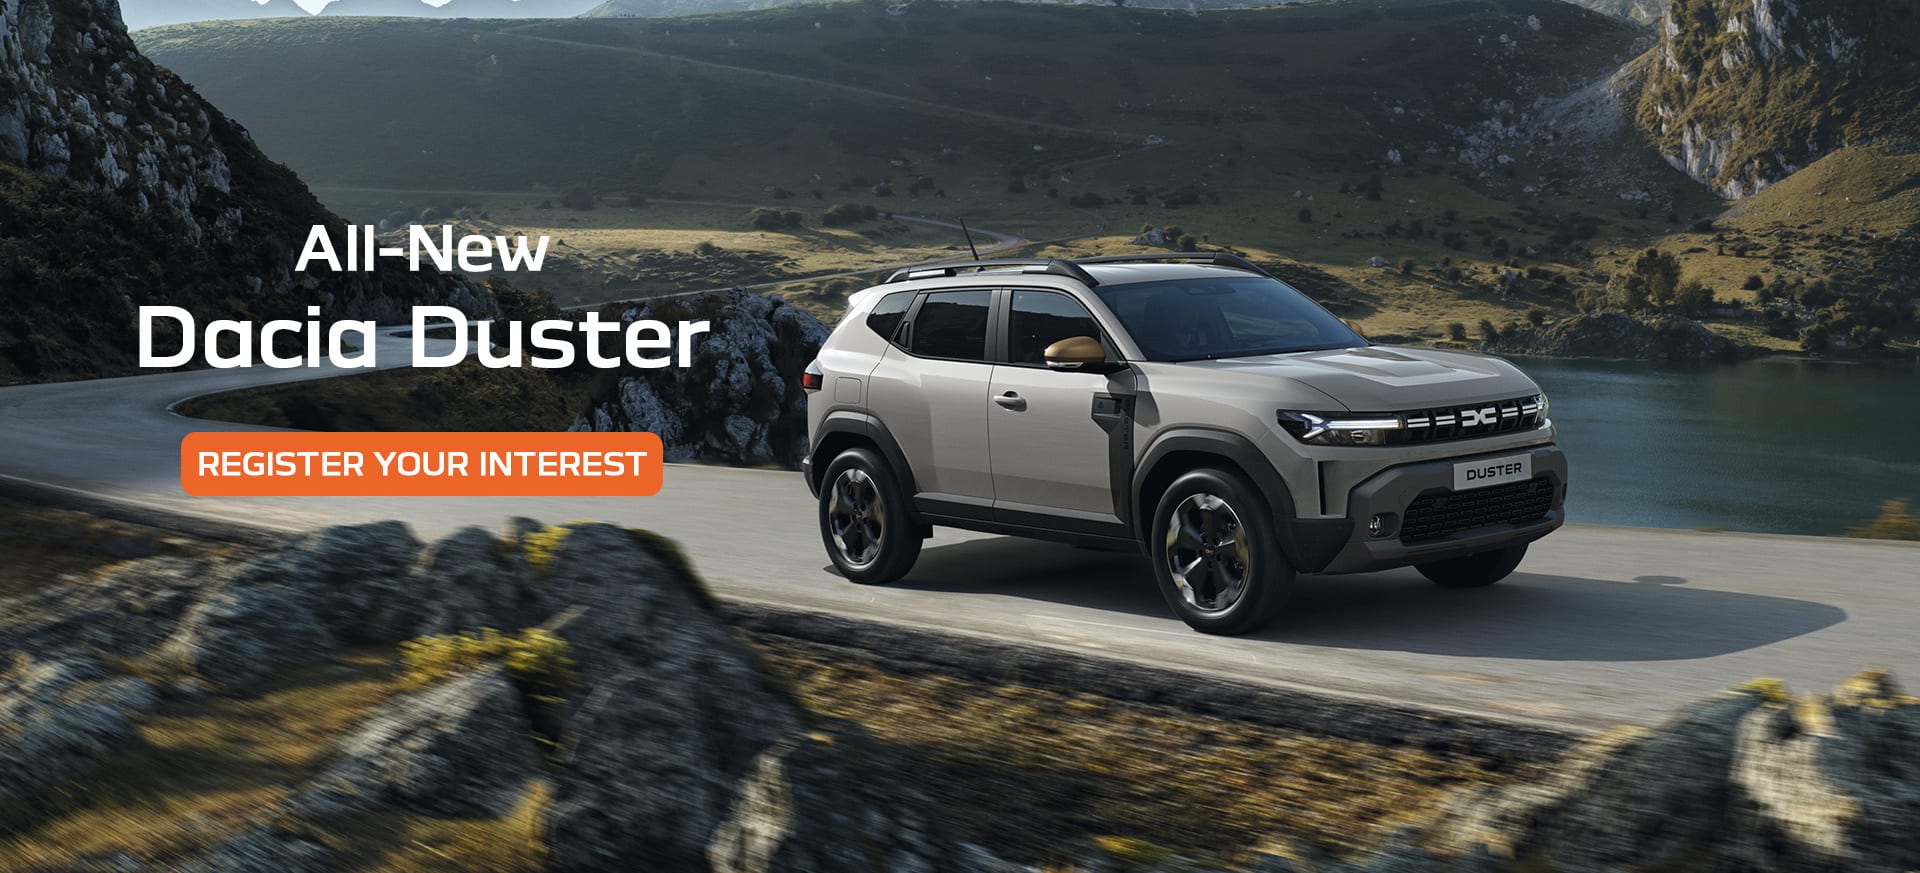 All-New Duster